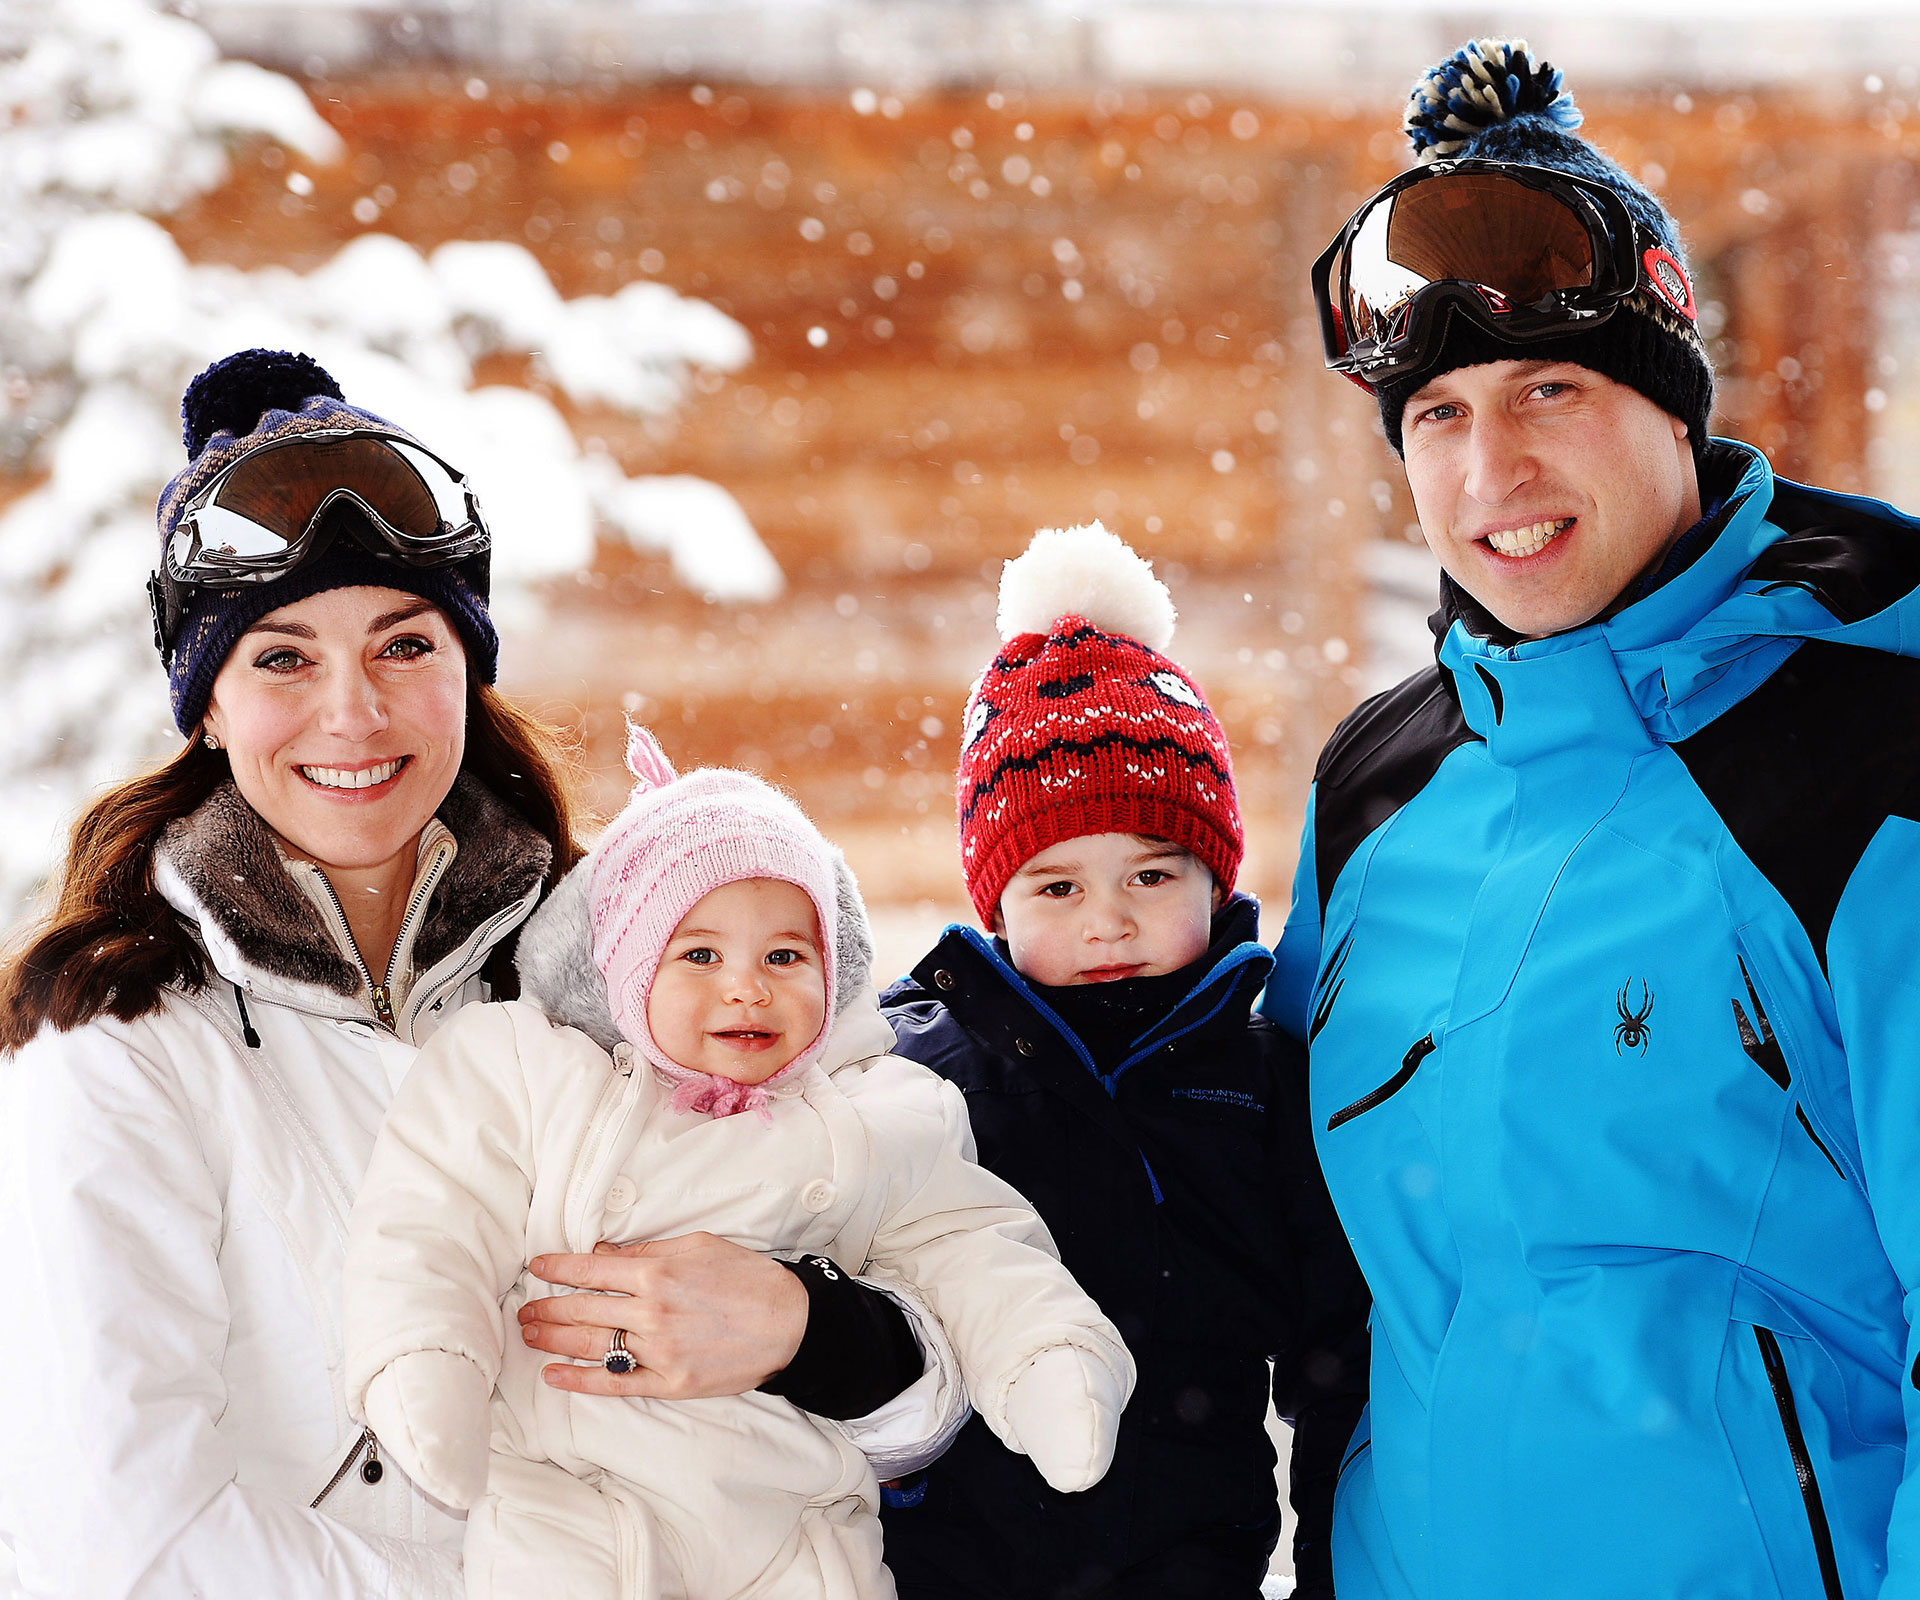 William and Kate’s secret family ski holiday